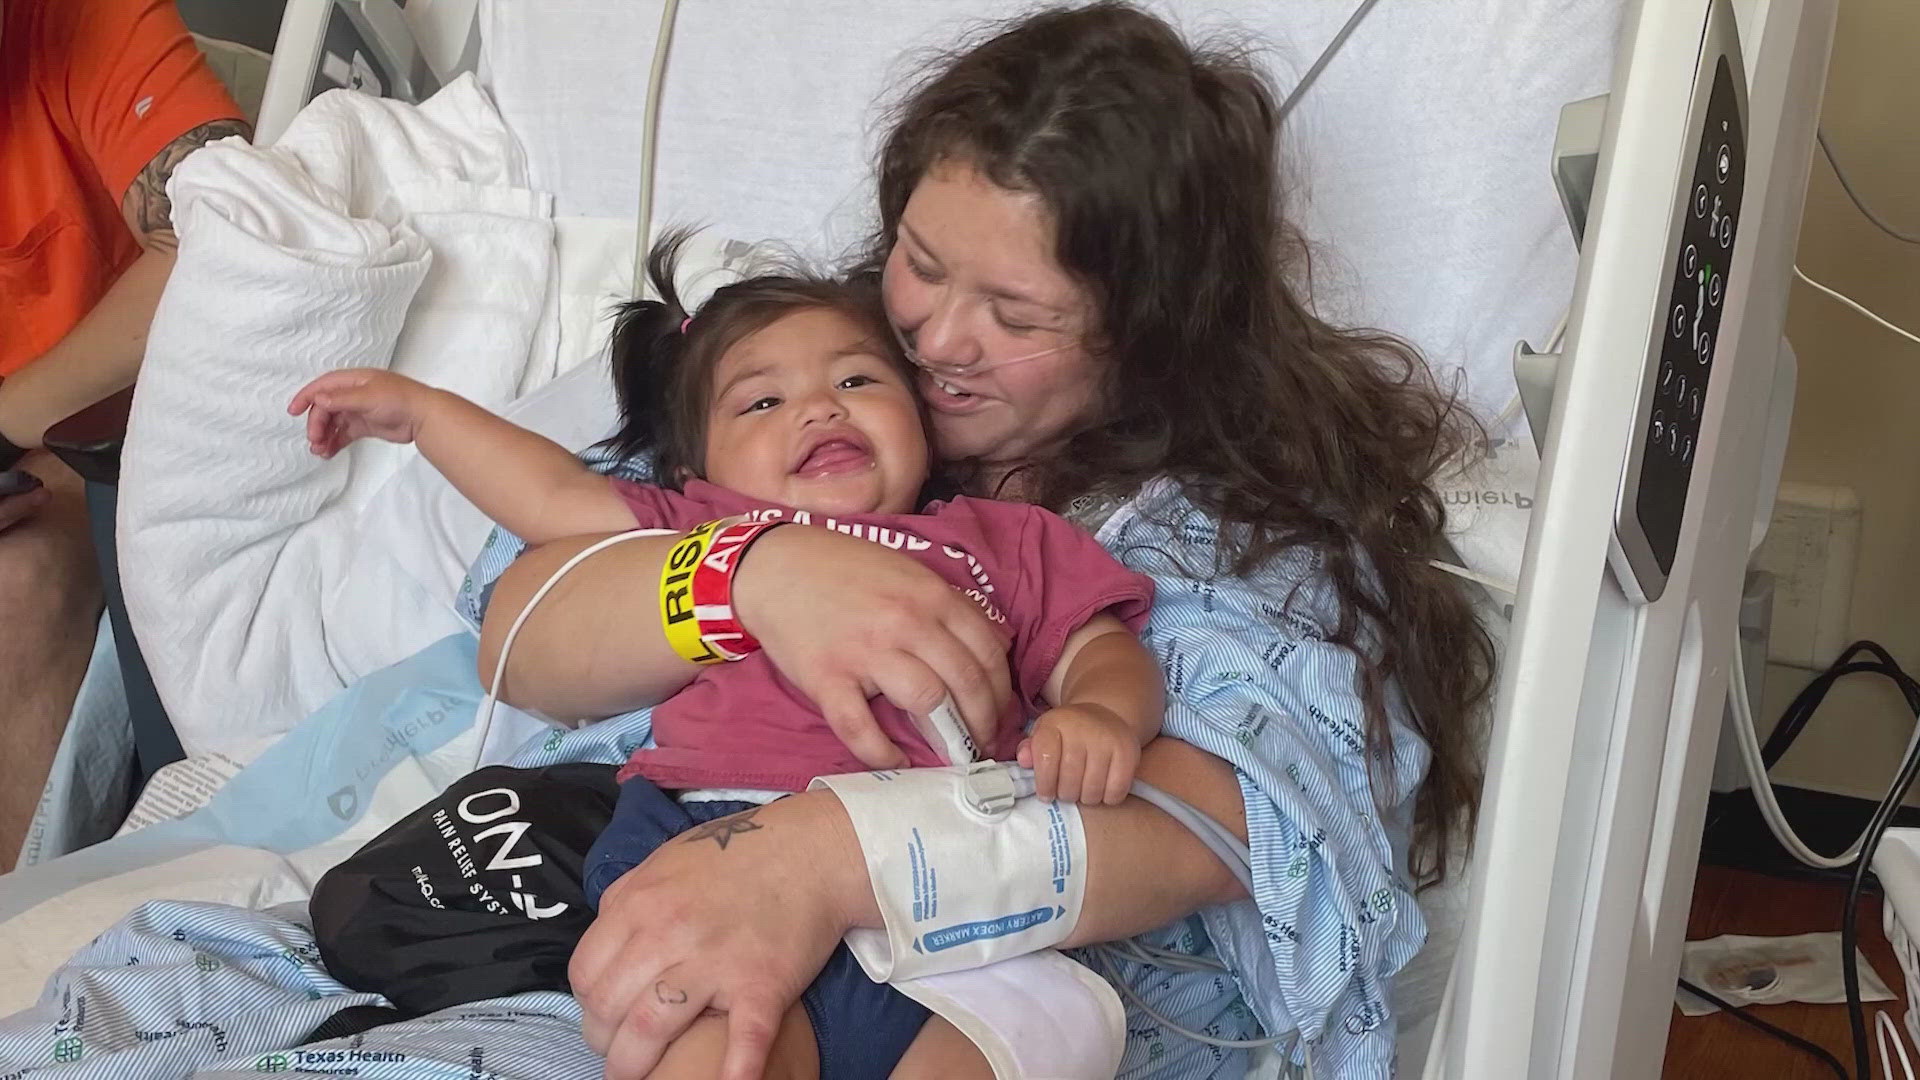 Veronica Bowers is recovering at the hospital after an EF-3 tornado destroyed her home and work.